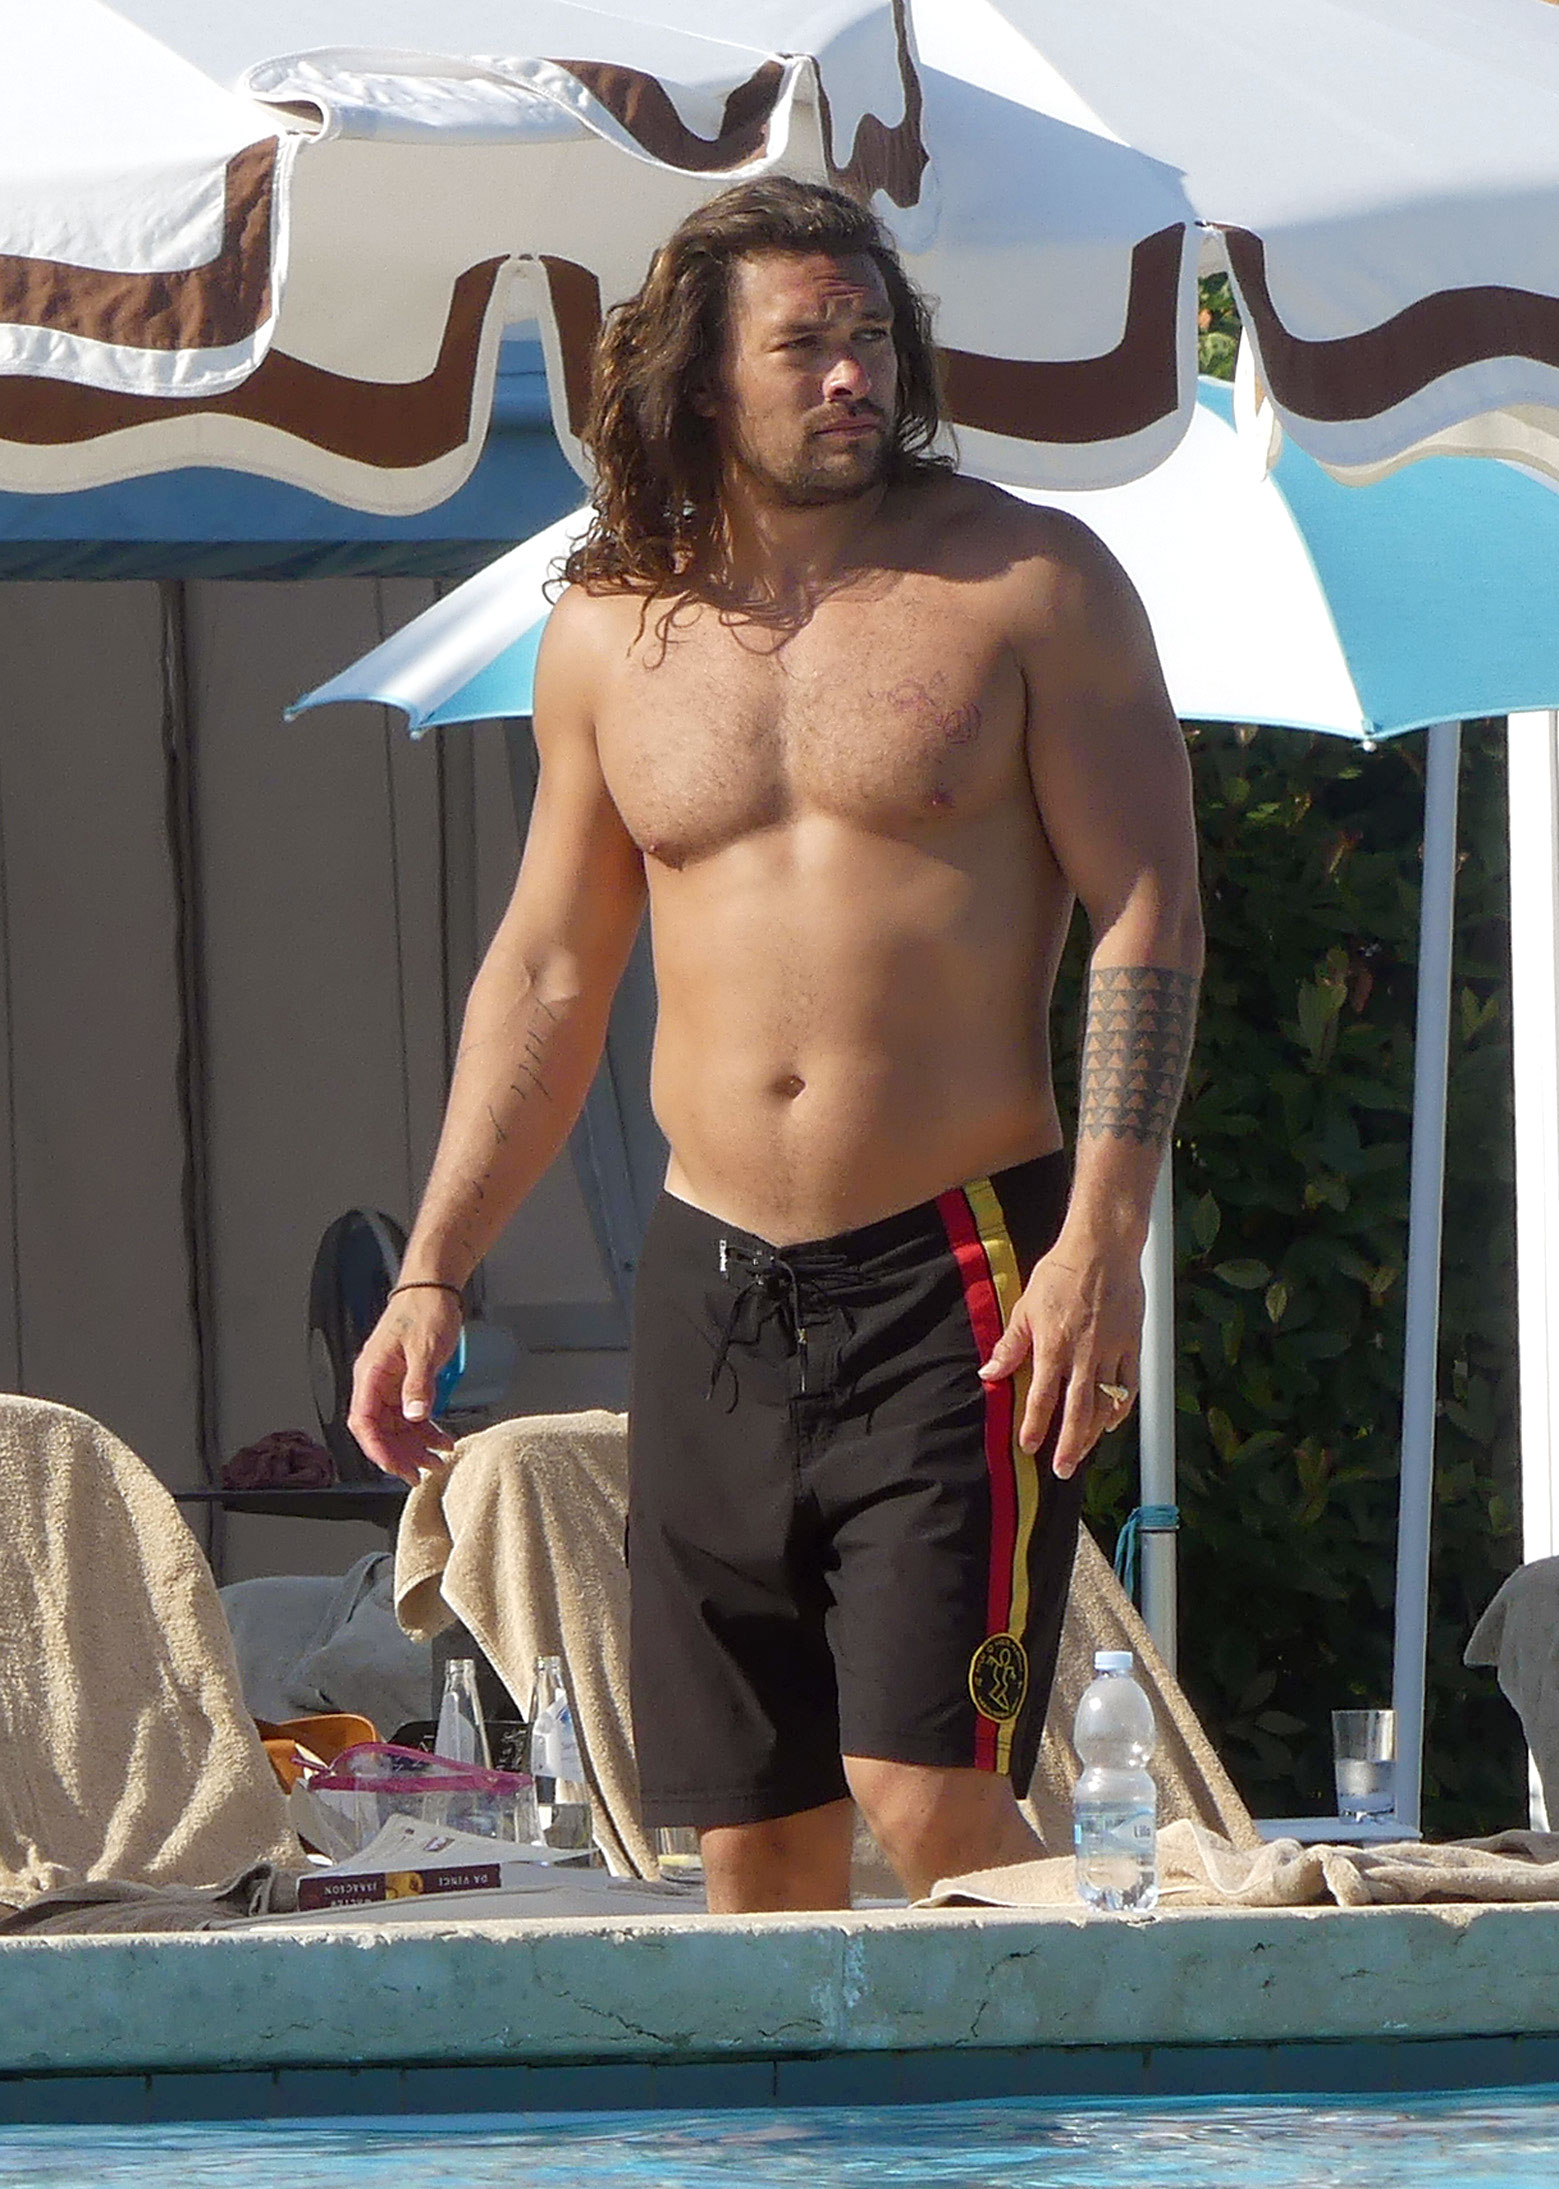 Hot Guys at the Beach - Hot Celebrities at the Beach Pictures